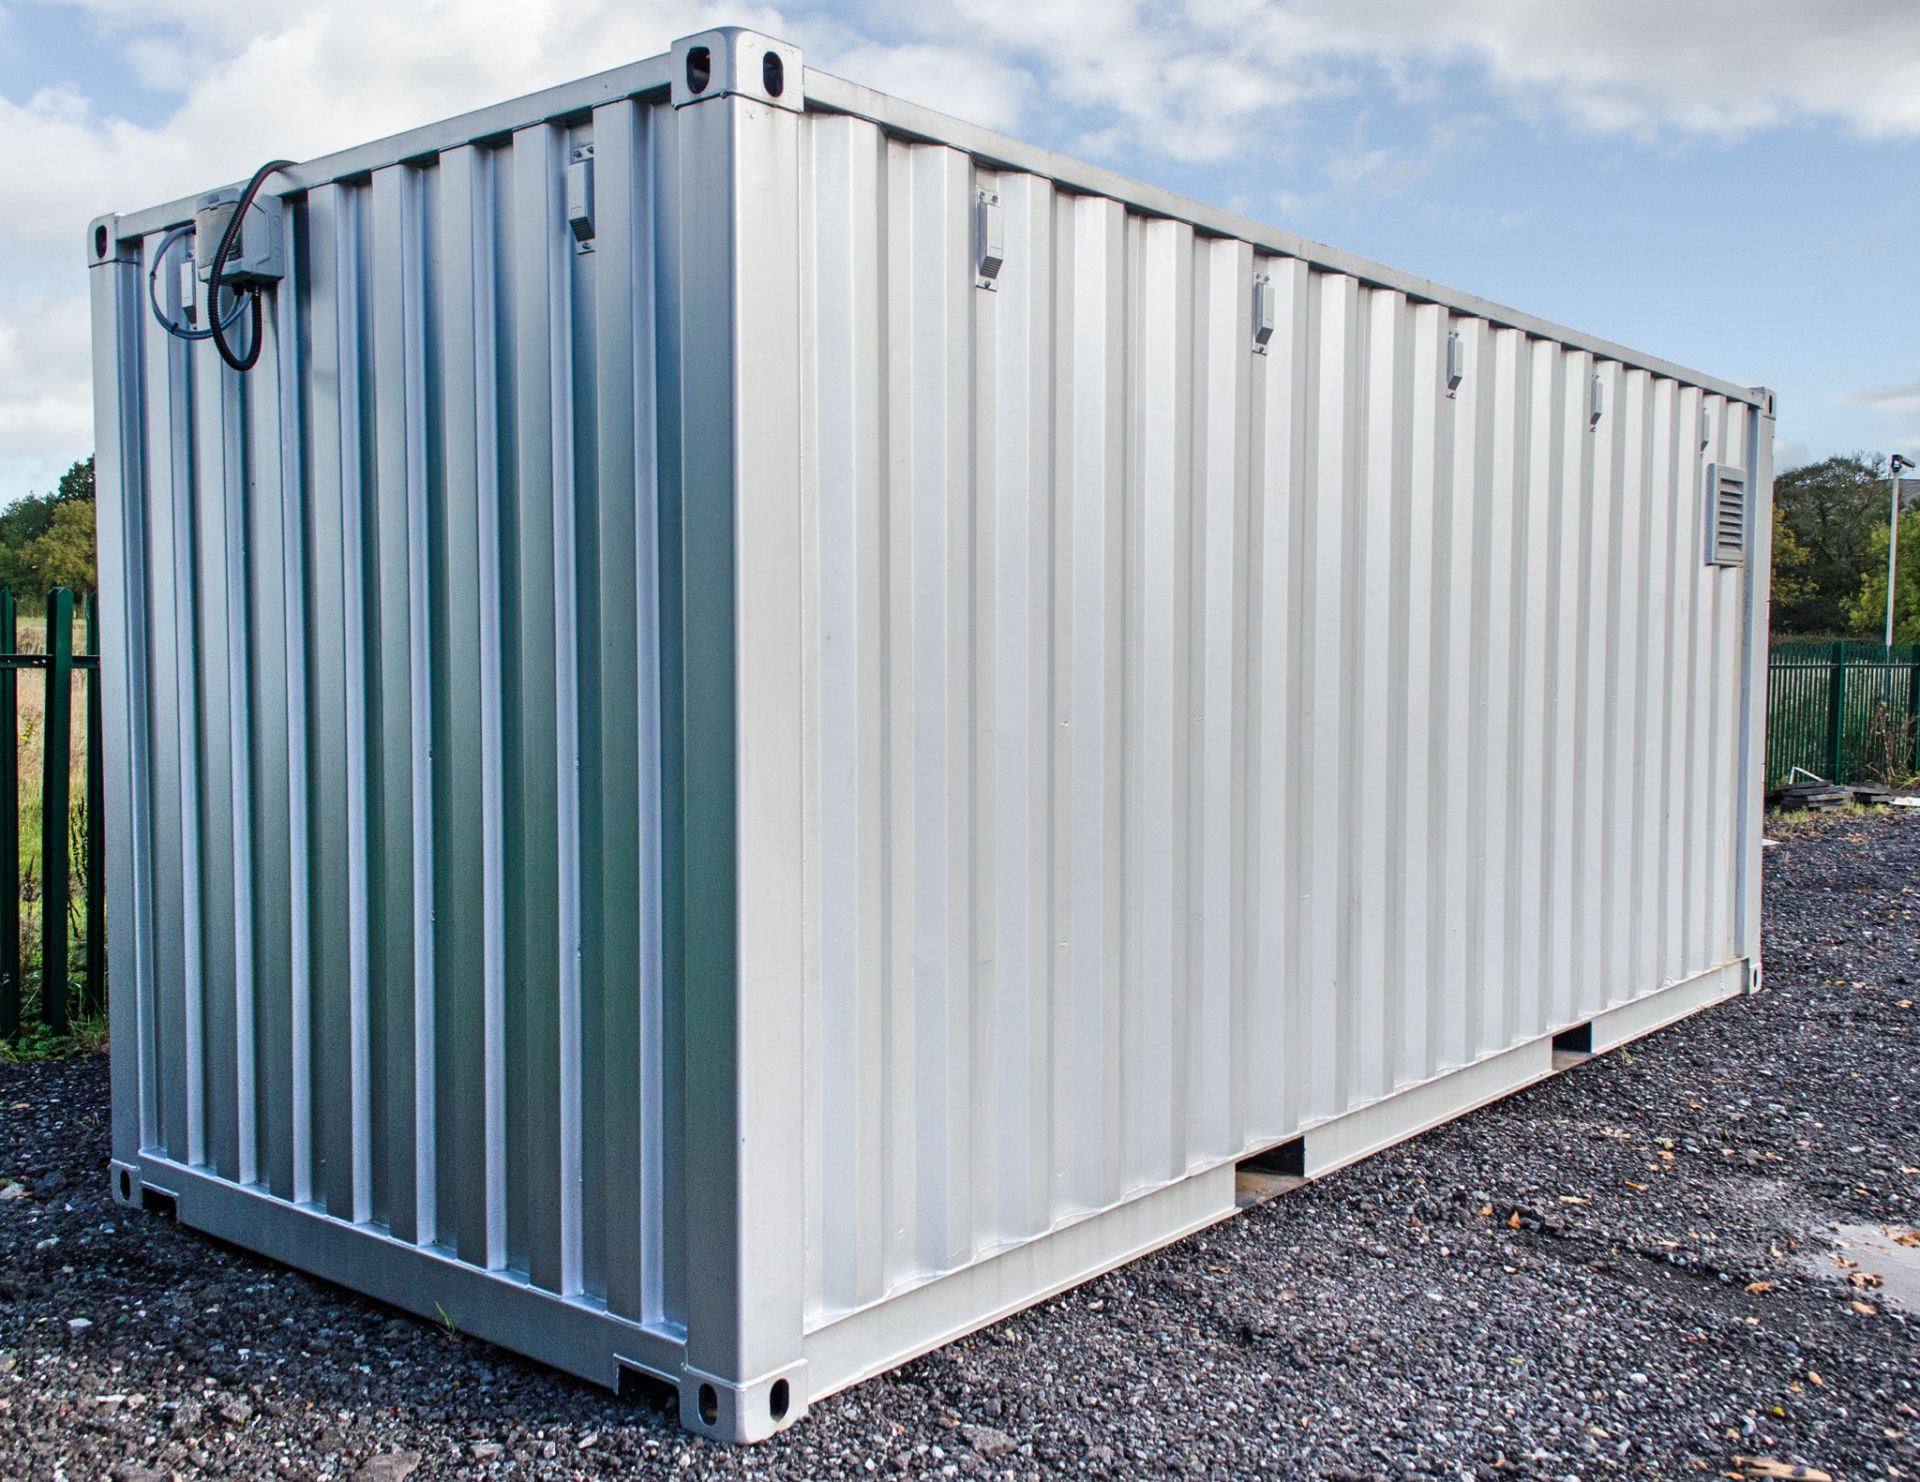 20 ft x 8 ft steel shipping container - Image 4 of 5